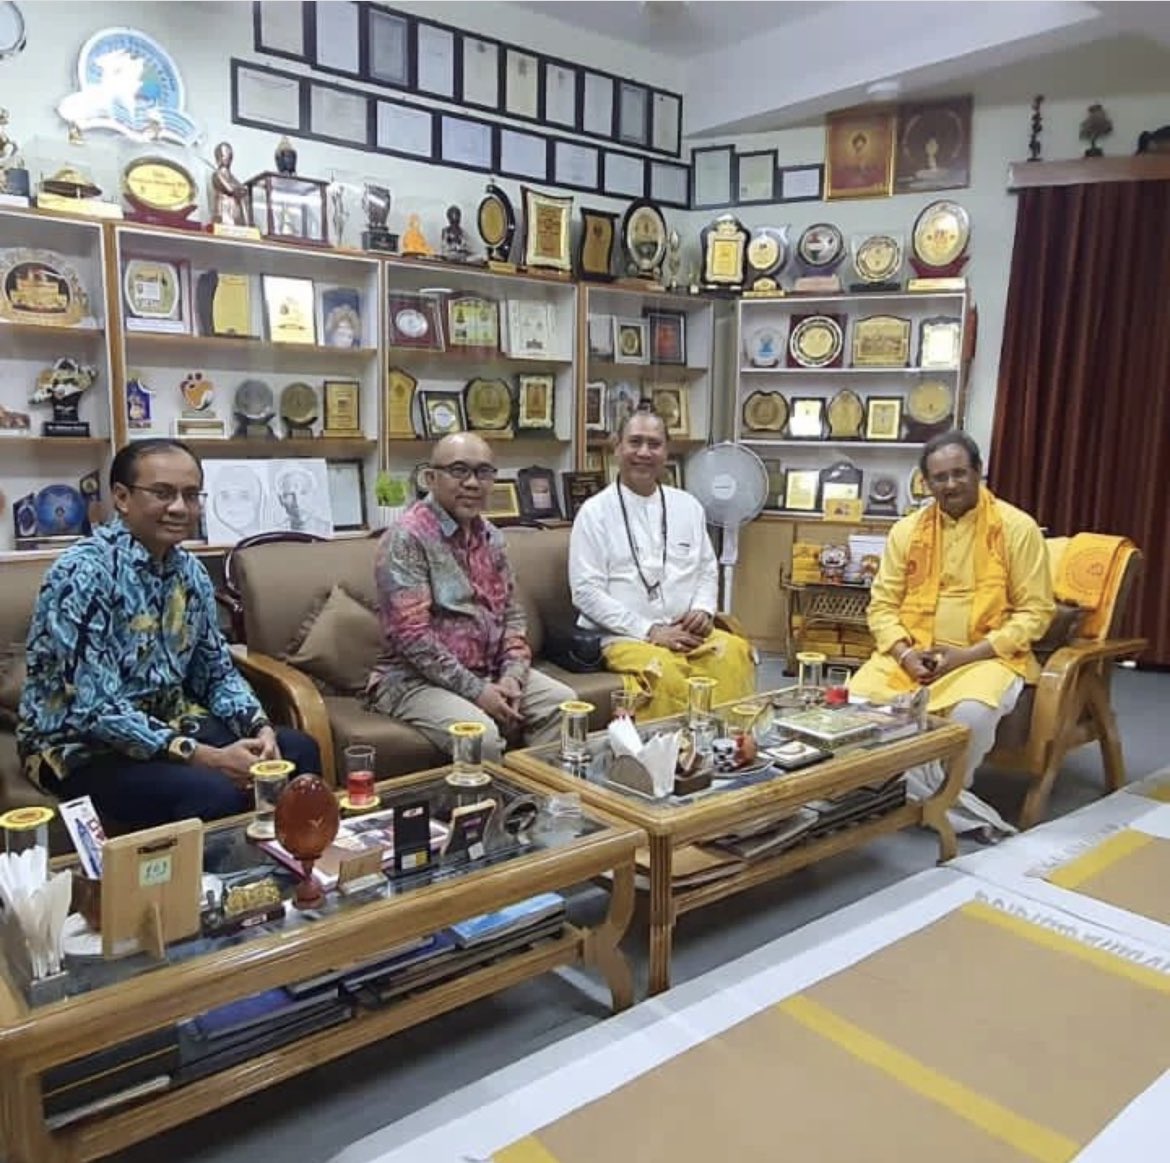 H. E. Dadang Hidayat Ji (Minister Counsellor, Economic Affairs), H. E. Mochammad Rizki Safary Ji (Minister Counsellor, Political Affiars) from the Embassy of Indonesia in India visited the University